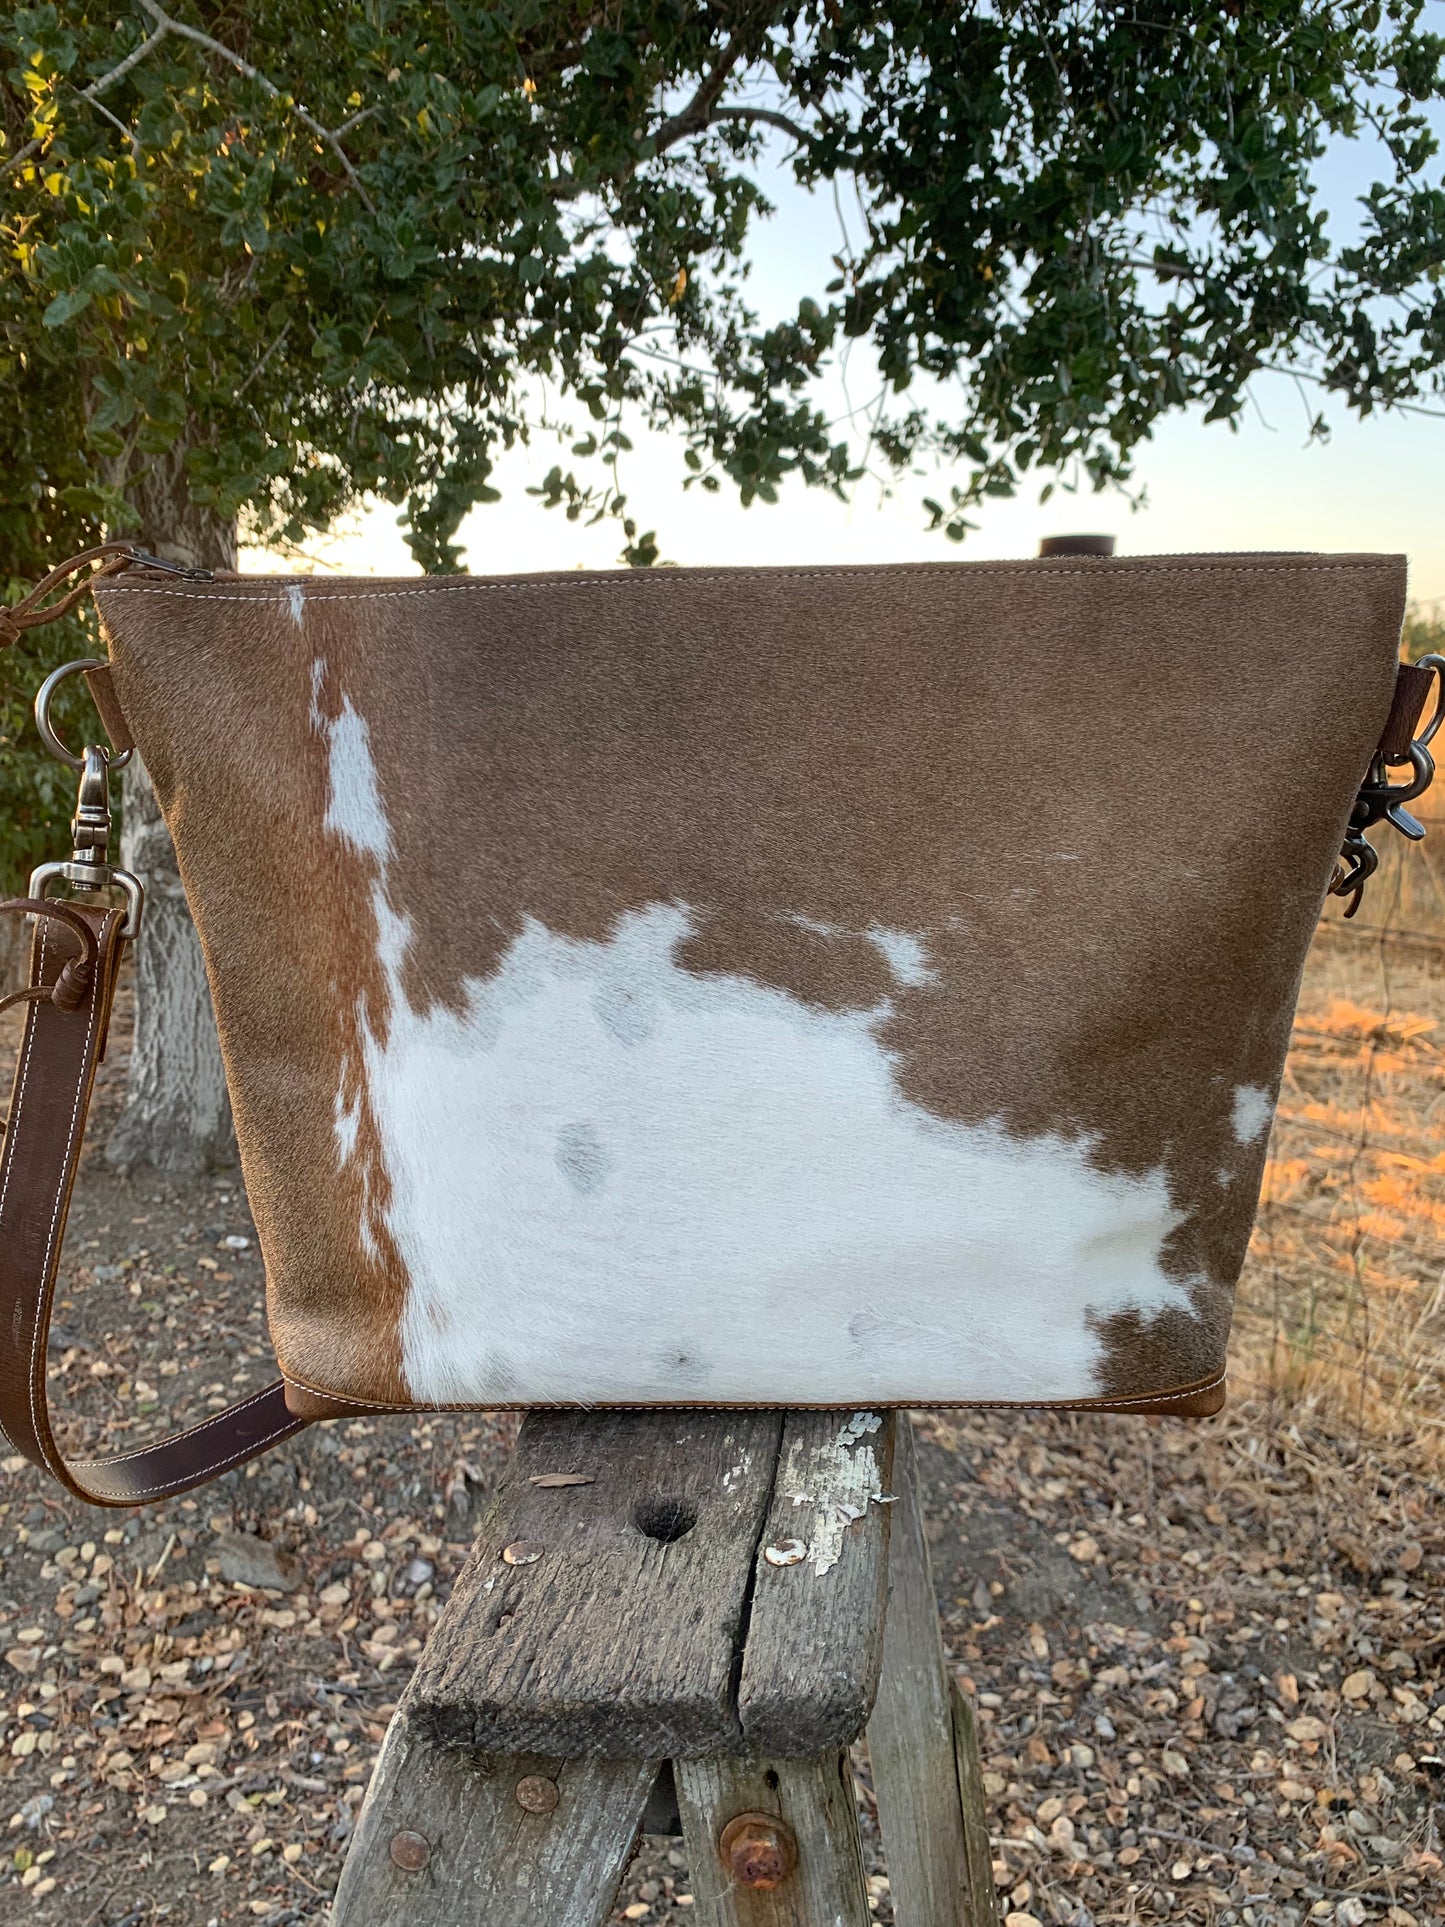 Windsor Bag - Brown with Cow Hair